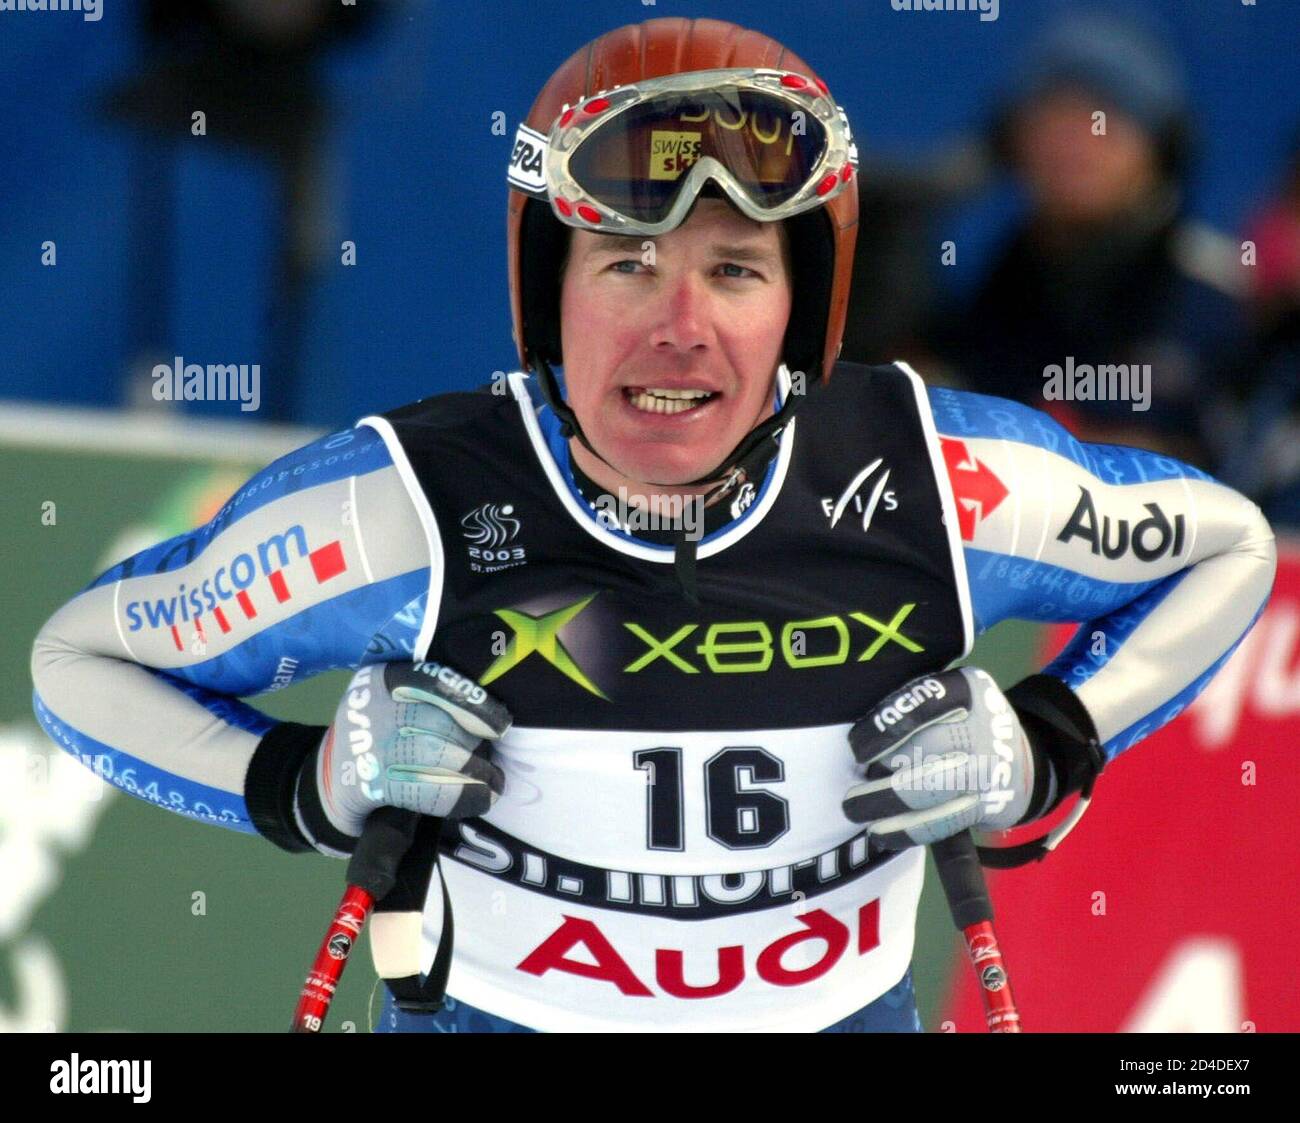 Bruno Kernen of Switzerland reacts after the men's Super-G at the World  Alpine Ski Championships in St. Moritz on February 2, 2003. [Austria's  Stephan Eberharter won the Gold medal in a time